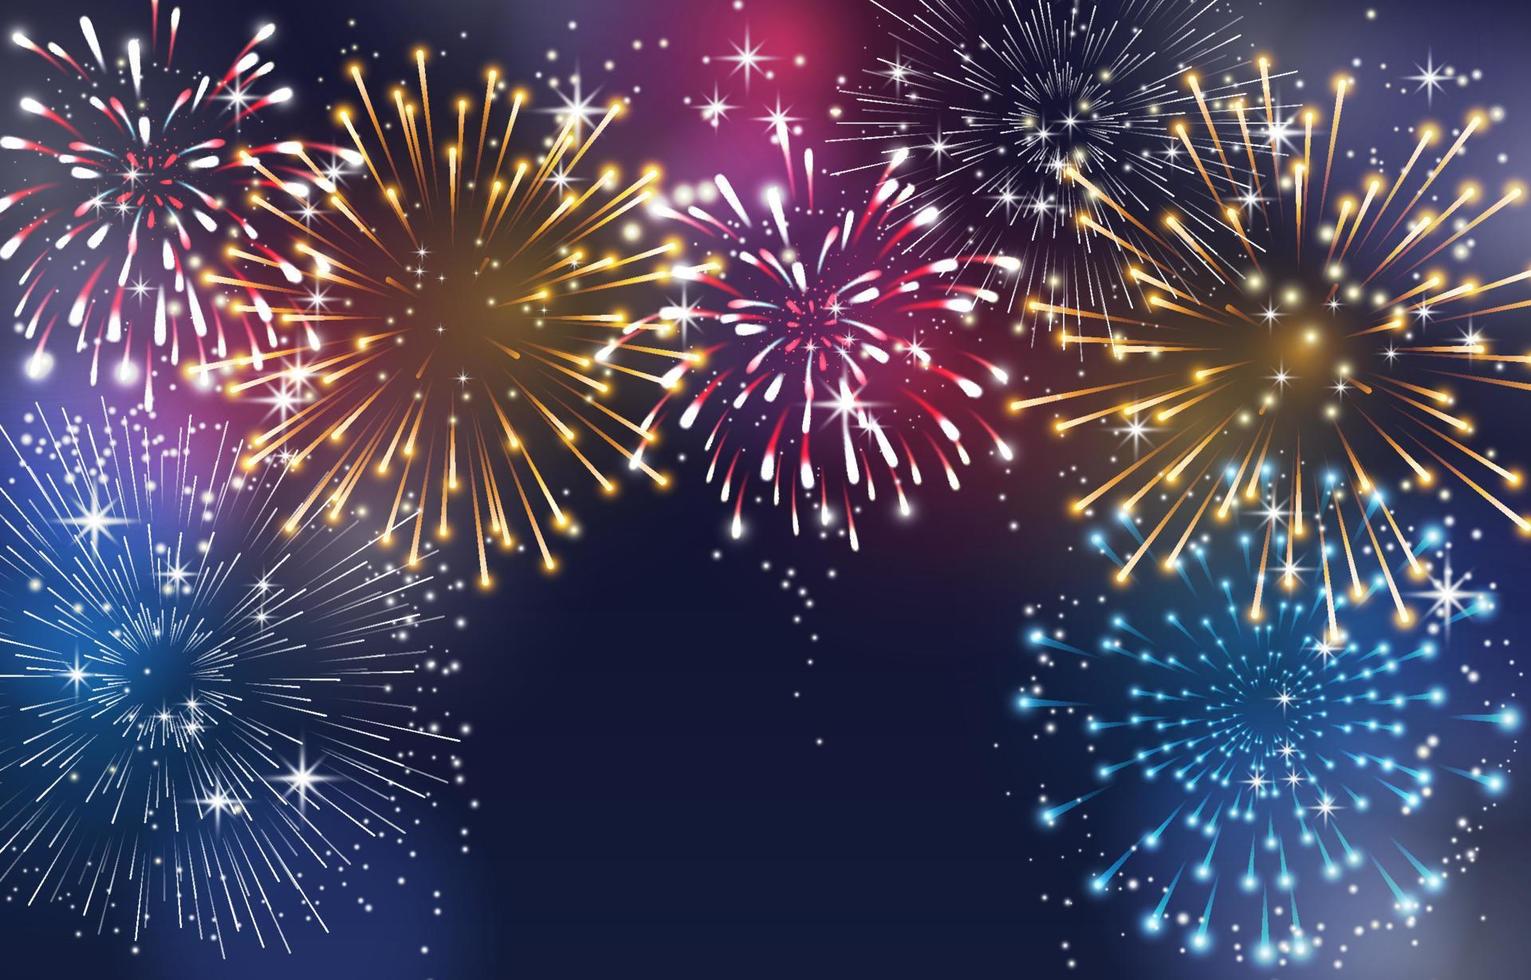 Fireworks Background at Night vector